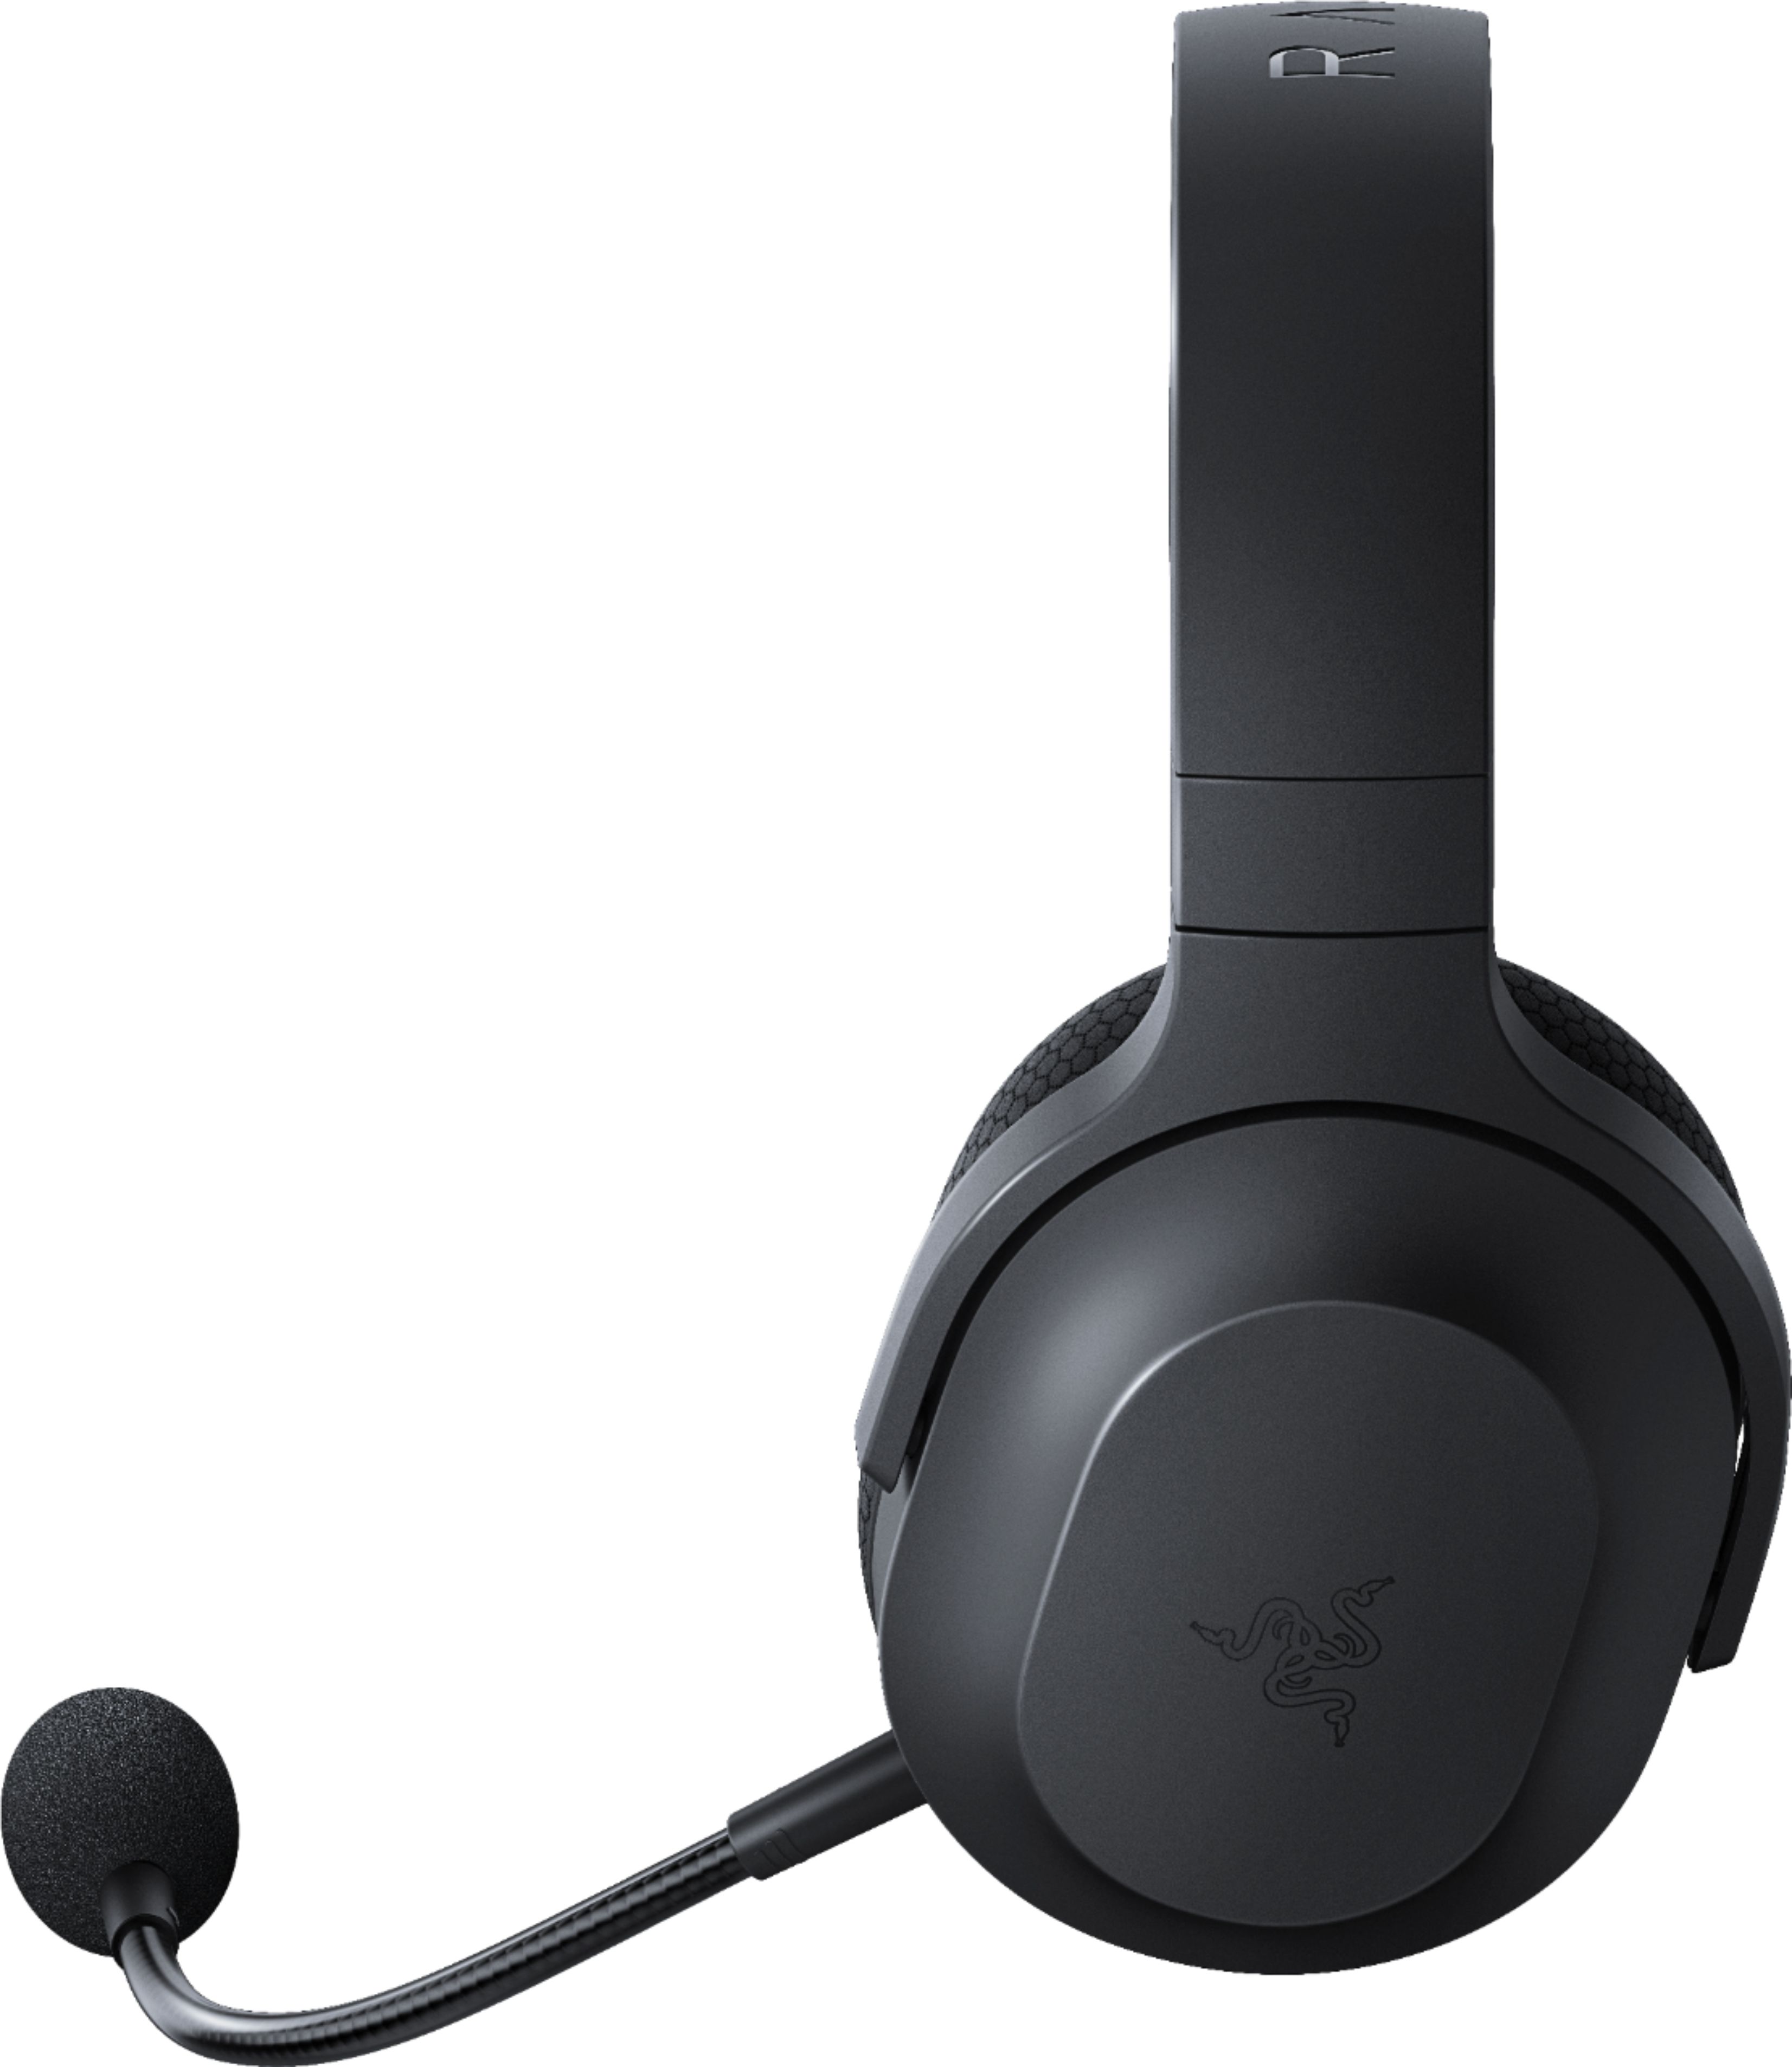 Razer Barracuda X Wireless Gaming & Mobile Headset Roblox Edition, PC,  Playstation, Android, iOS, 2.4GHz Wireless + Bluetooth, Lightweight 250g,  40mm Drivers, 50 Hour Battery - Black 